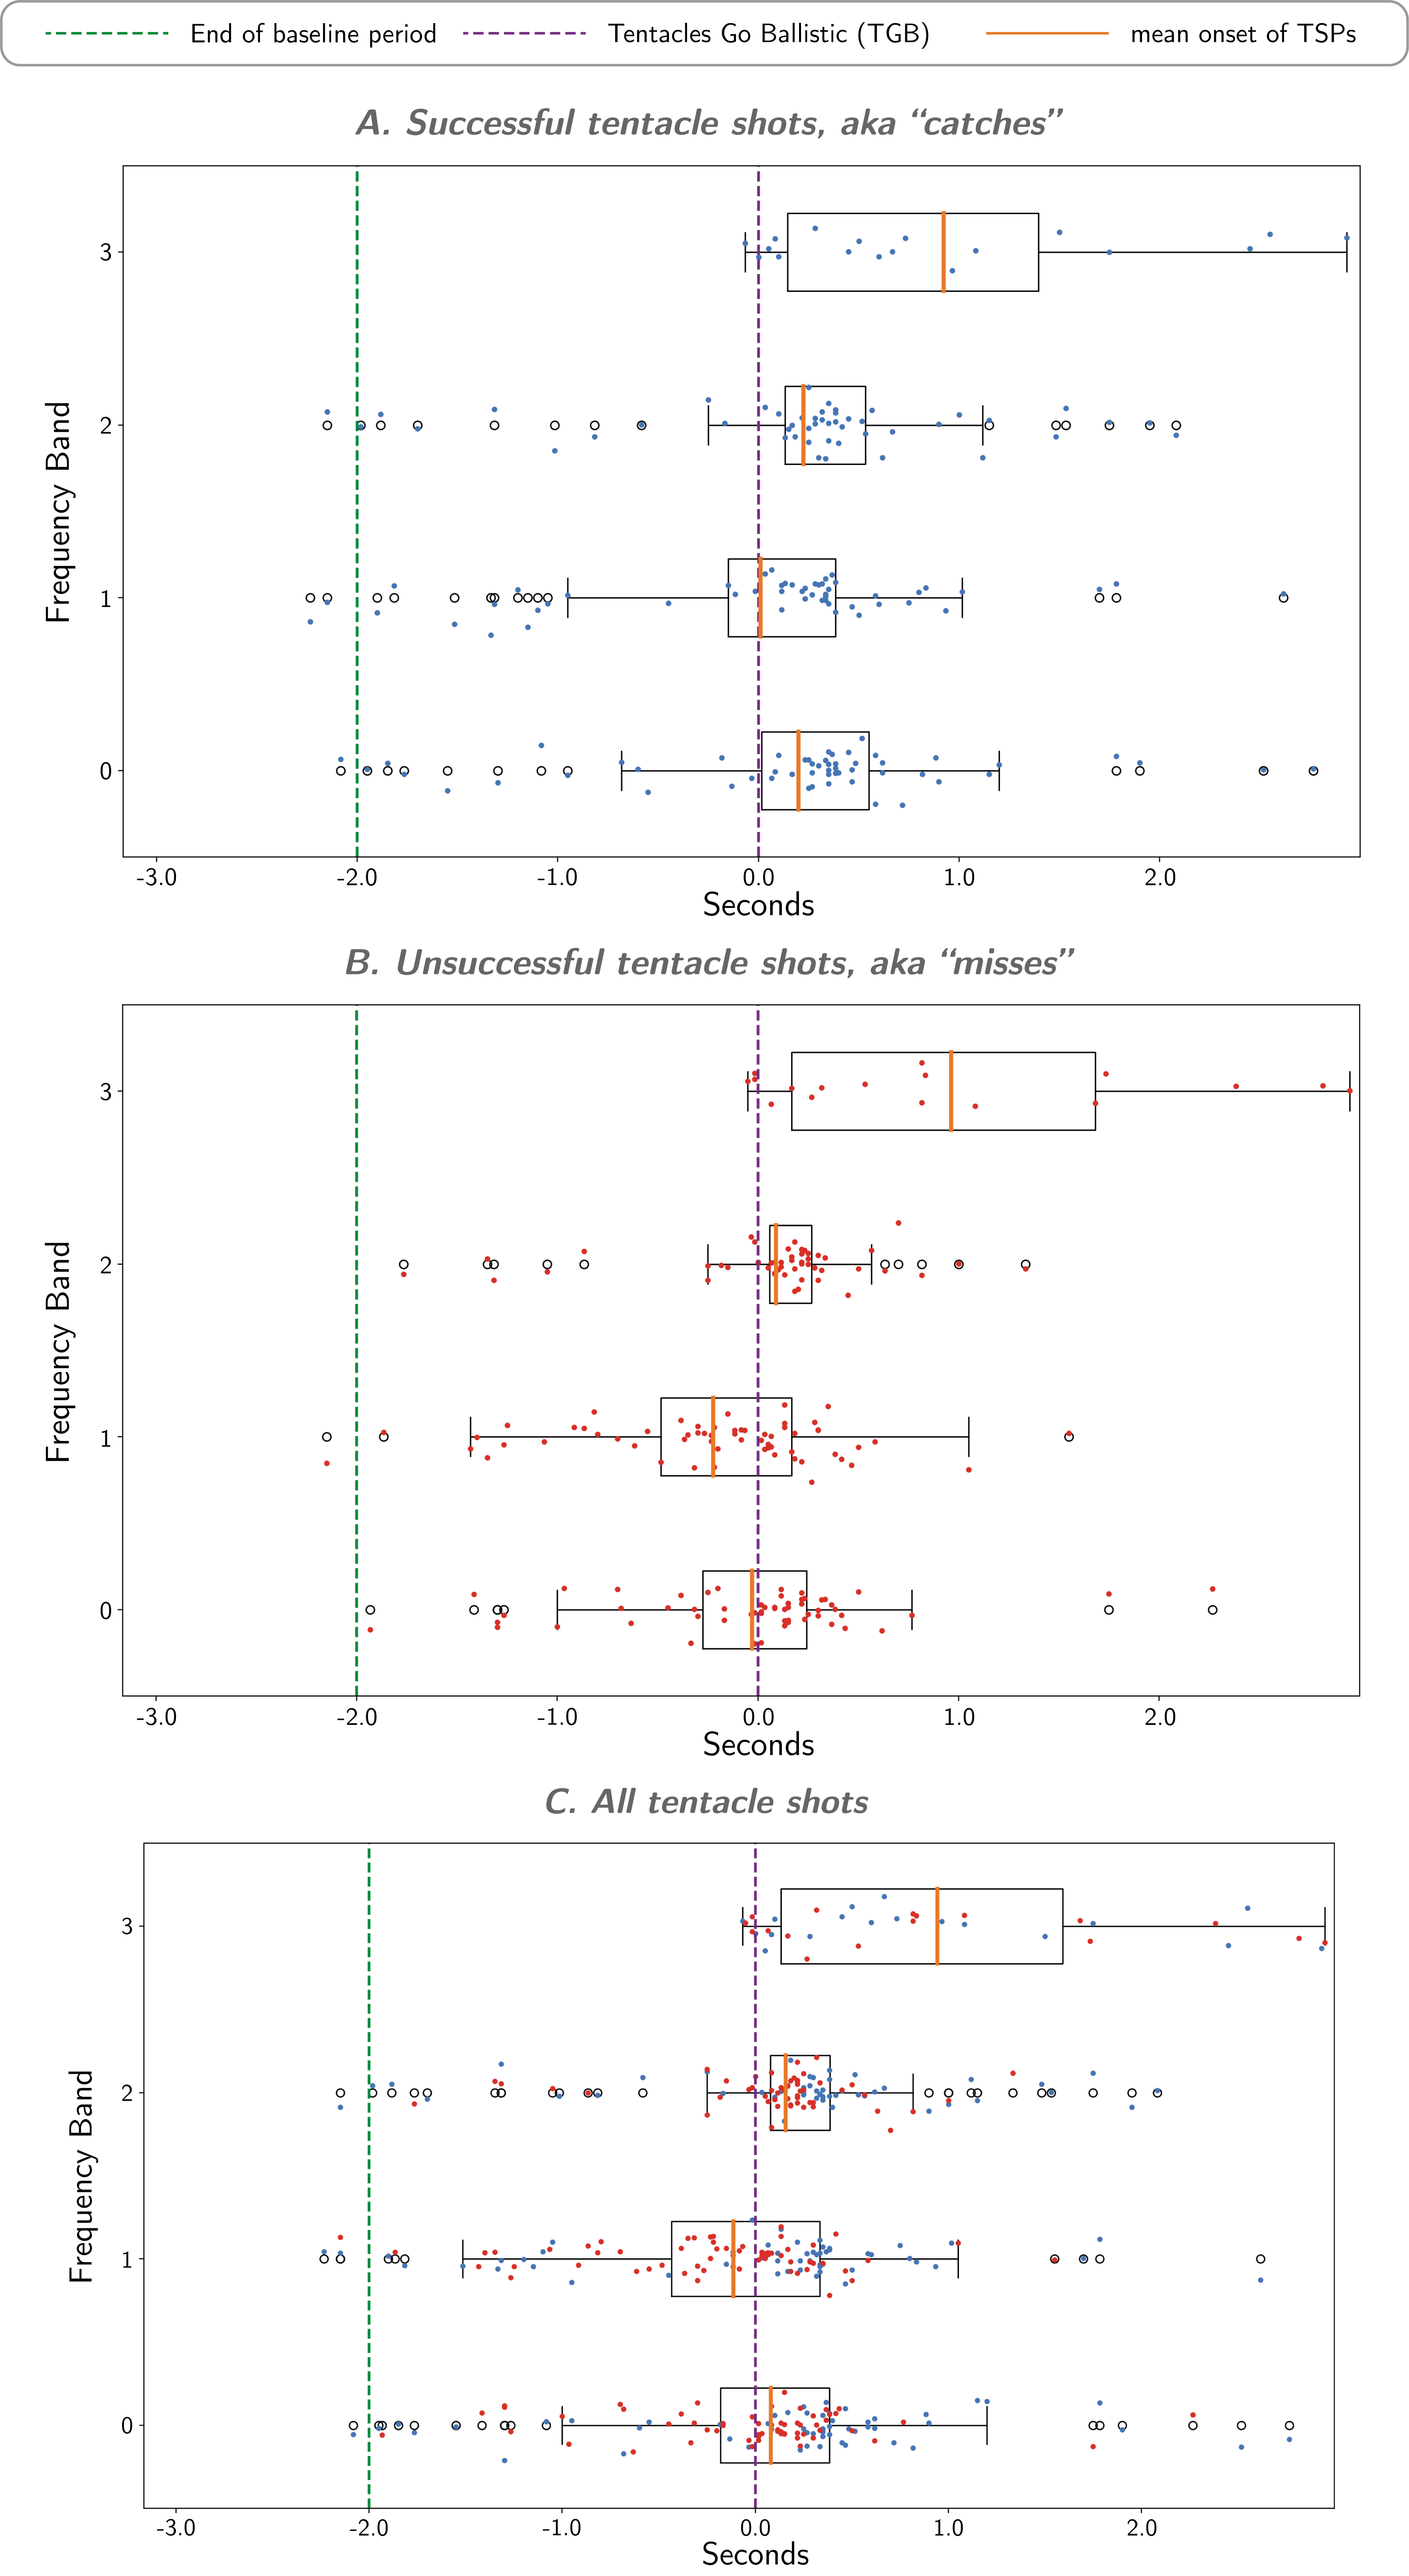 Figure S7: Boxplots showing distribution and mean onset of TSPs